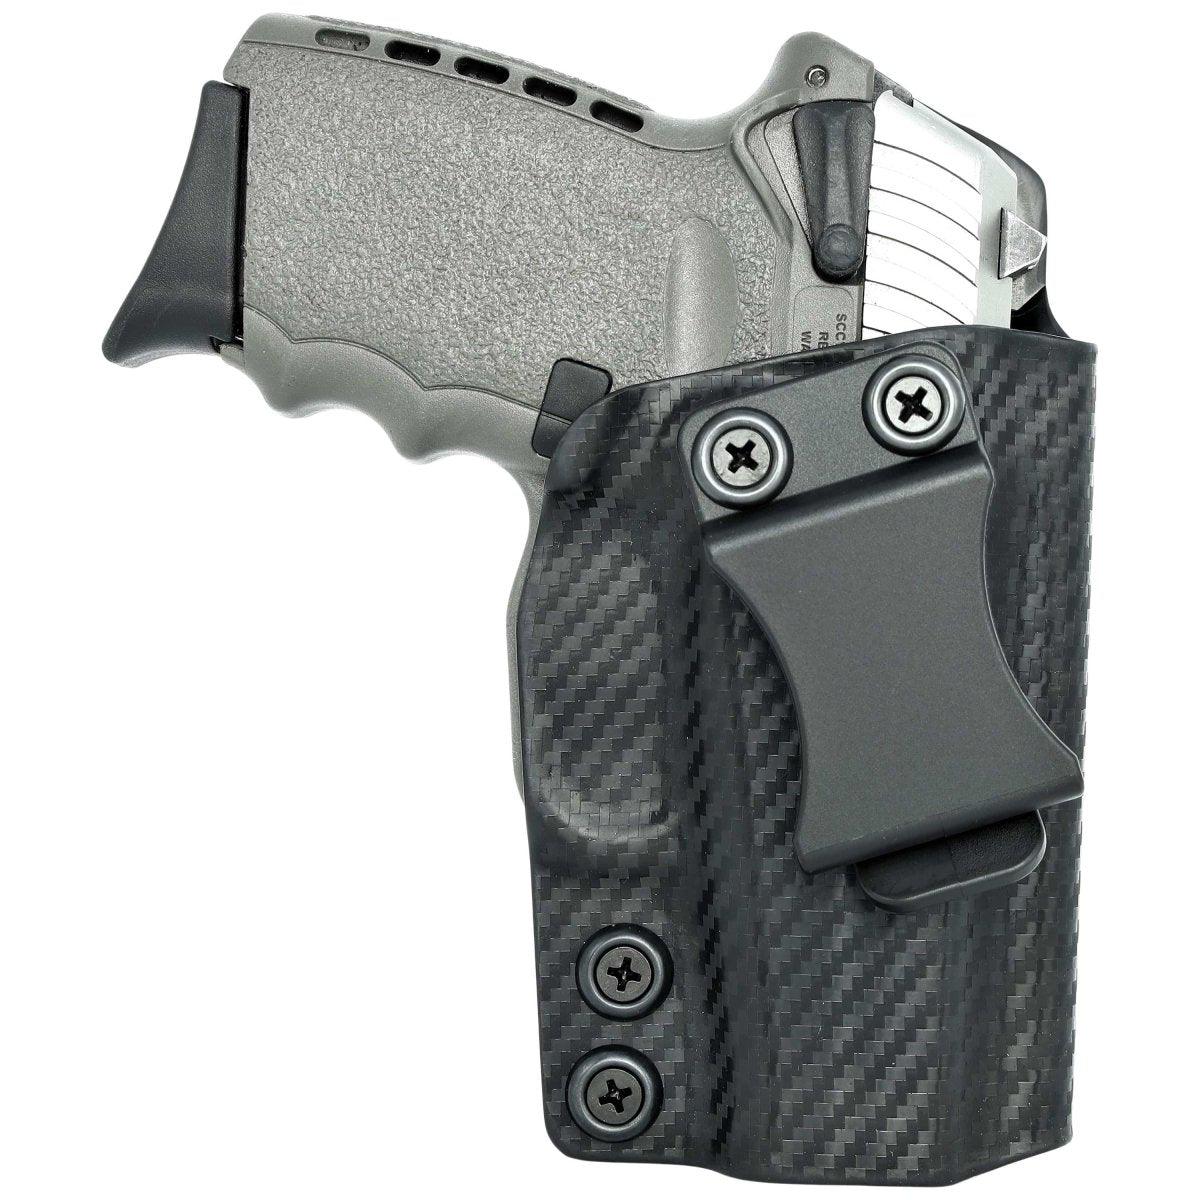 CPX-1 HOLSTERS